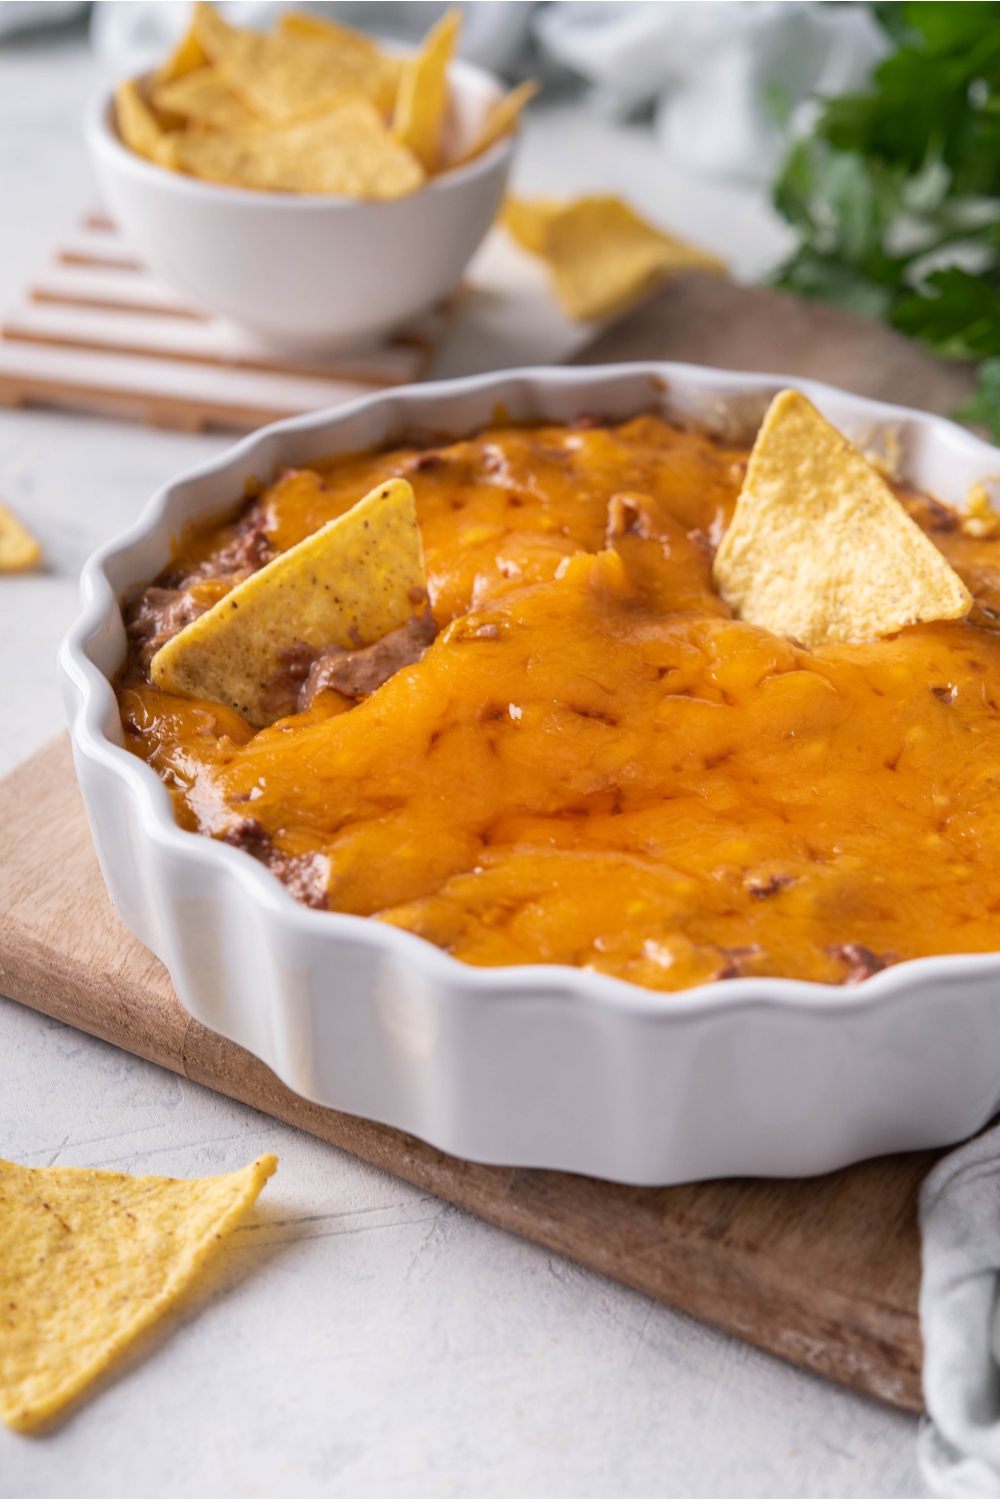 Skyline chili dip in a white serving dish with two tortilla chips sticking out of the dip. The serving dish is on a wood board and there is a bowl of tortilla chips in the background.